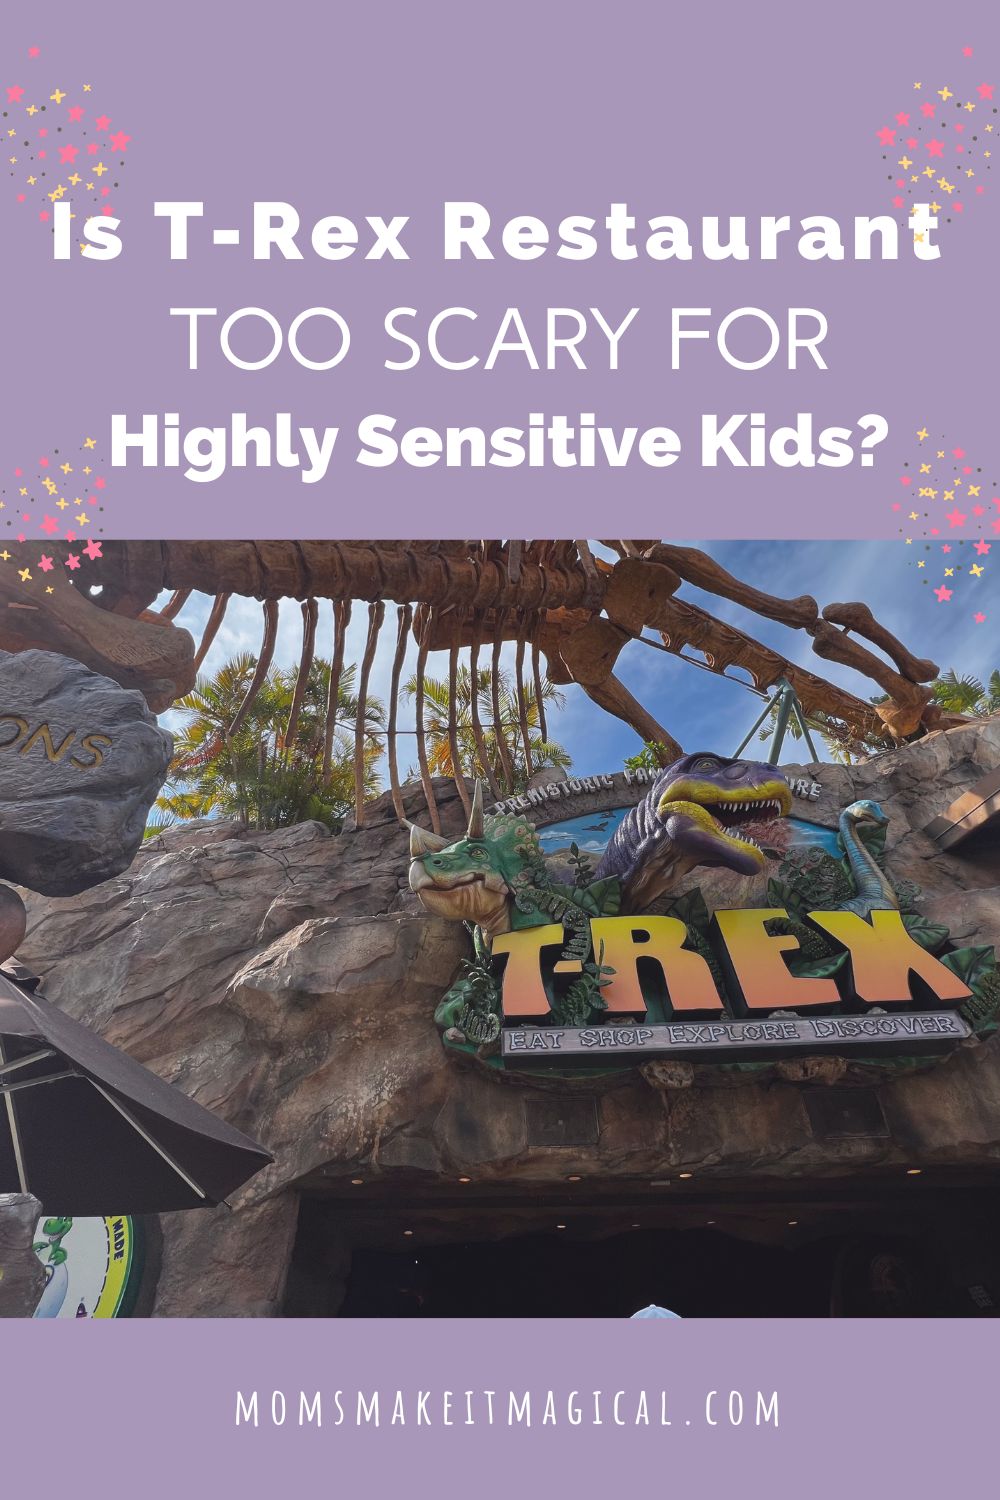 Image of entrance of T-rex restaurant at Disney Springs. Text above reads Is t-rex restaurant to scary for highly sensitive kids? from moms make it magical dot com.